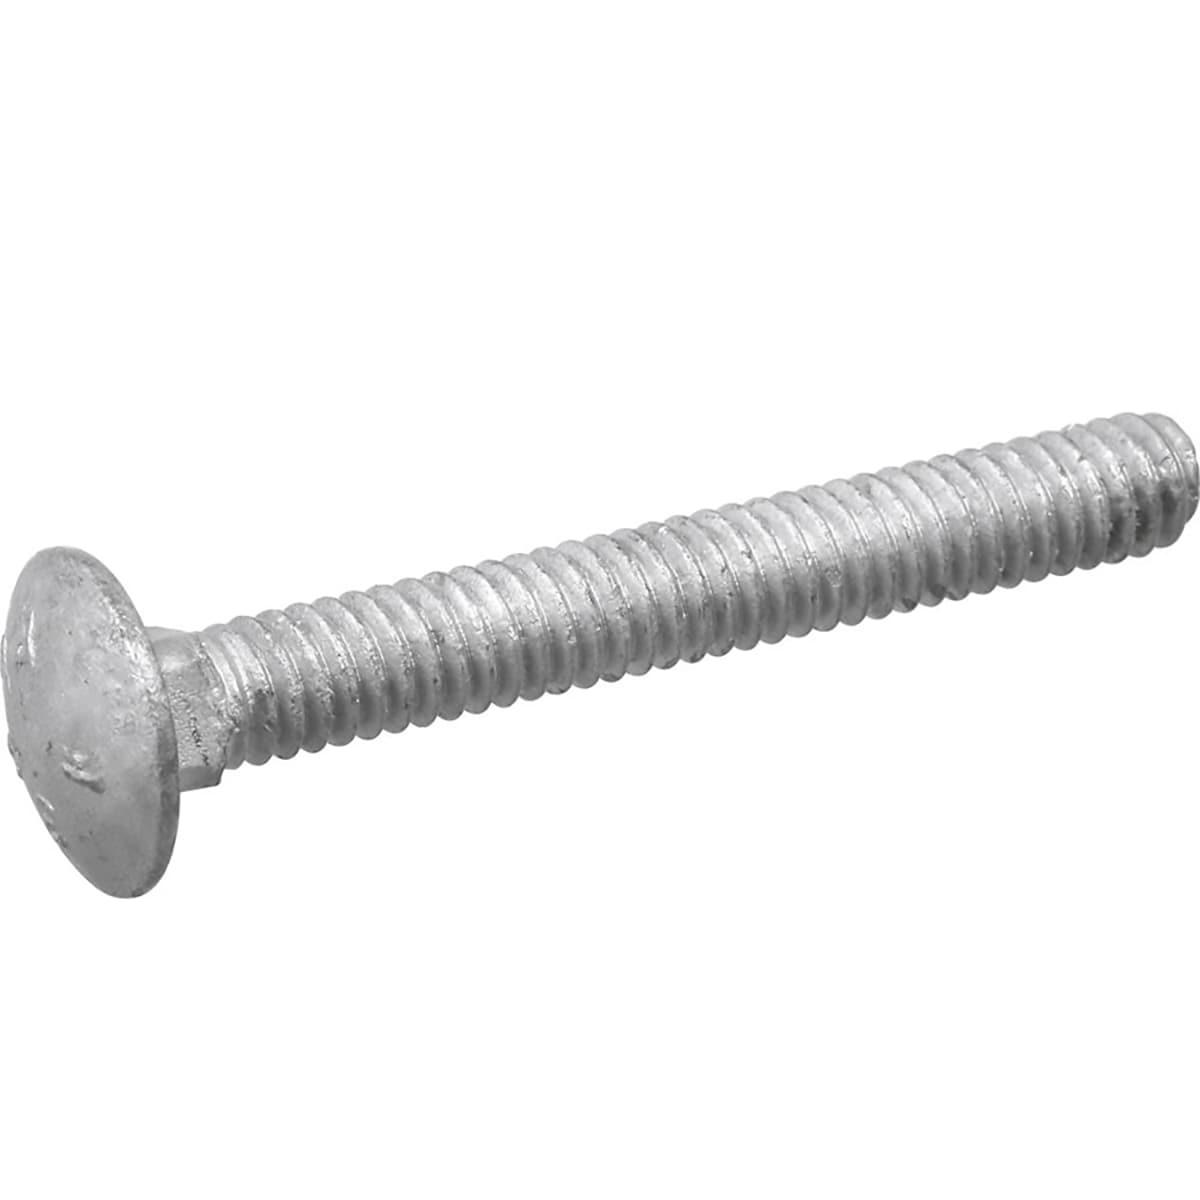 Carriage Bolt Hot Dipped Galvanized Bolts 3/8"-16 x 8-1/2" PT Qty-25 